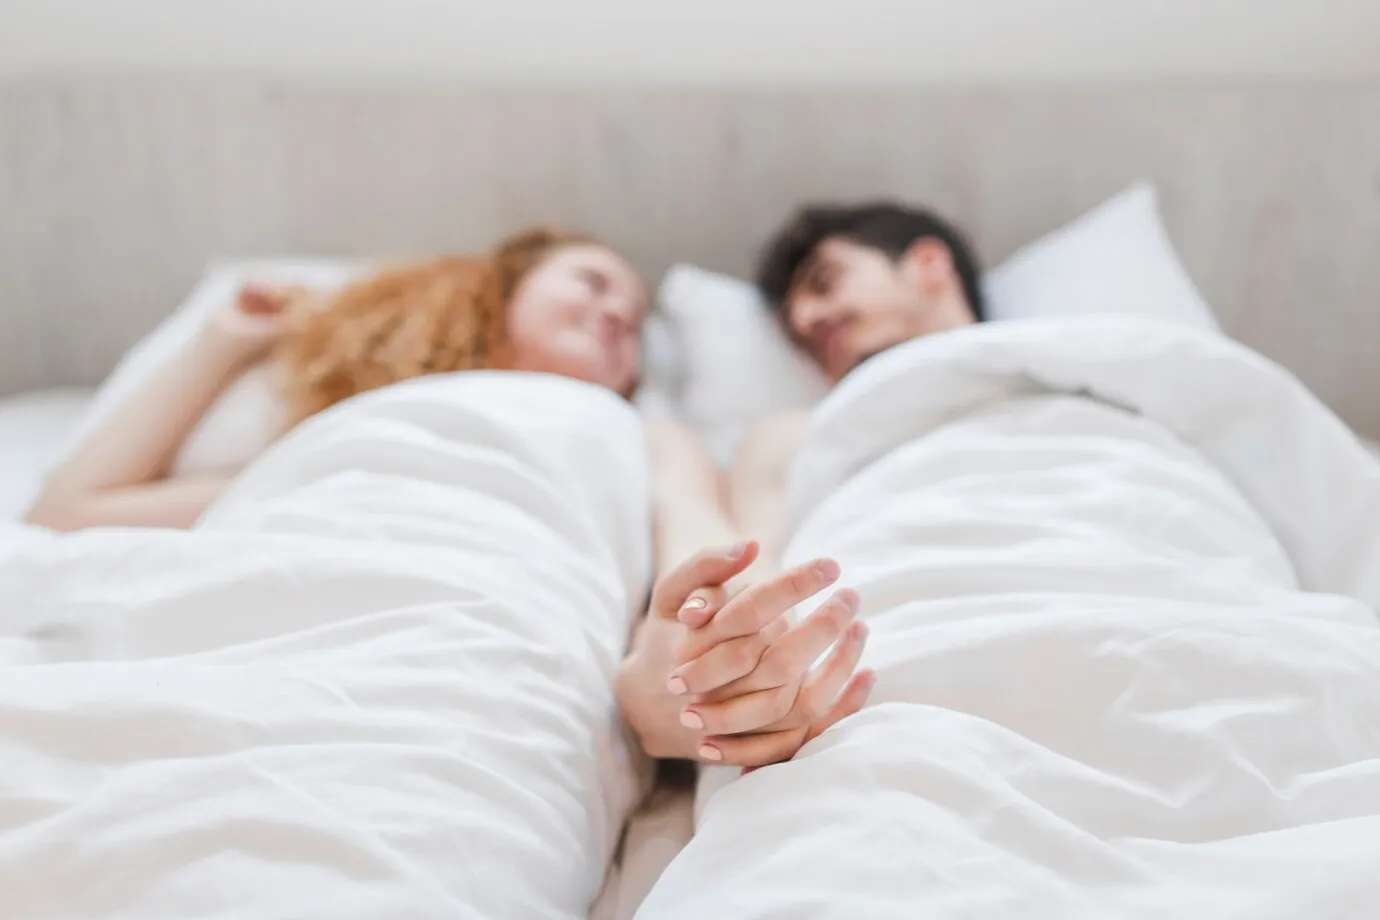 couple-holding-hands-while-lying-bed_23-2147909503